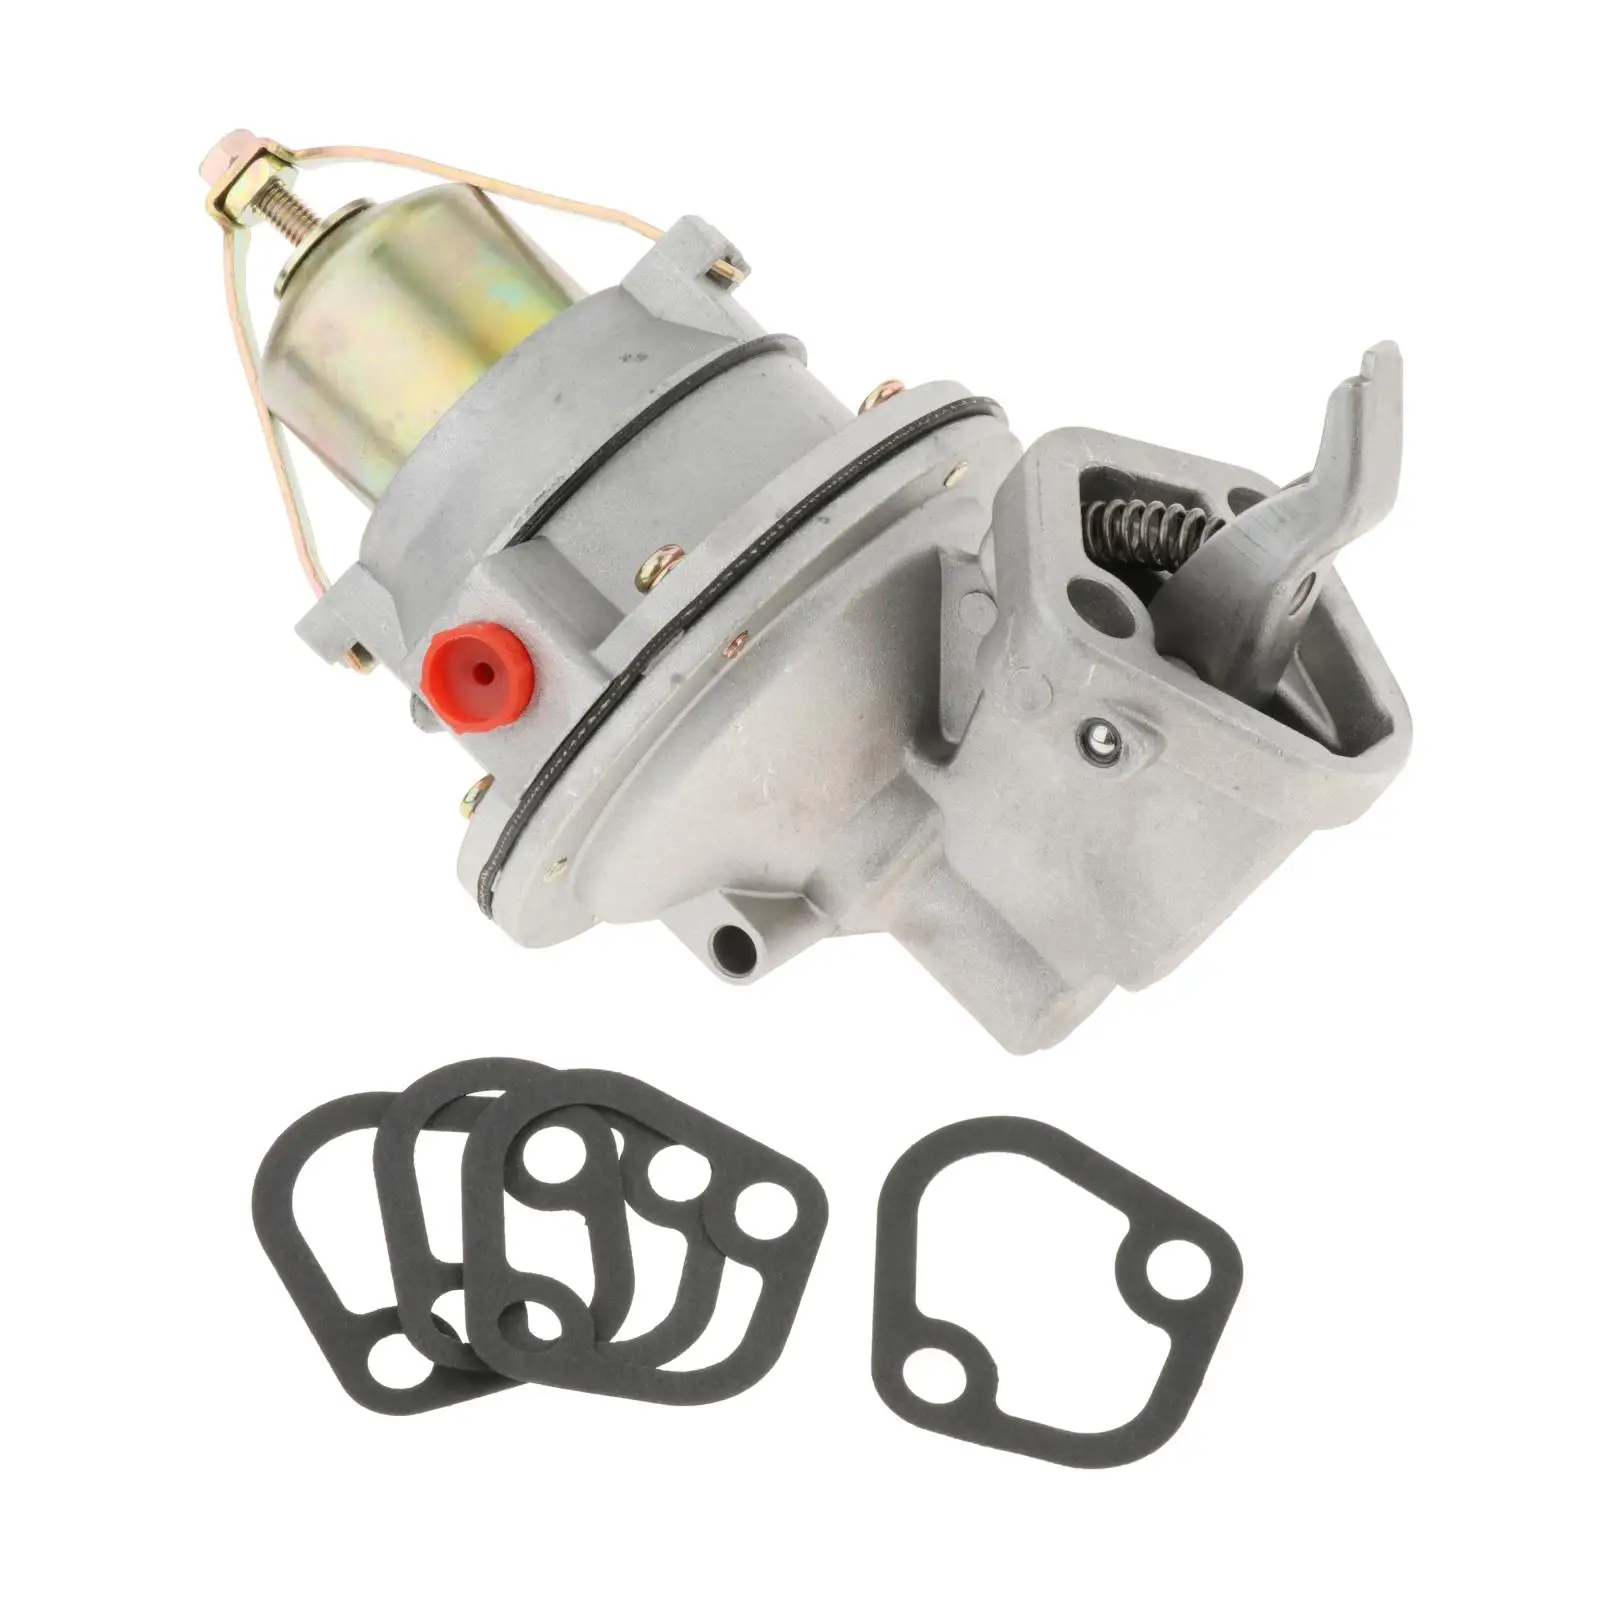 3854858 Fuel Pump Kit Engine Parts 18-7282 861676T09 Replace 509407 with Install Kit Assembly for Mercruiser 470-1